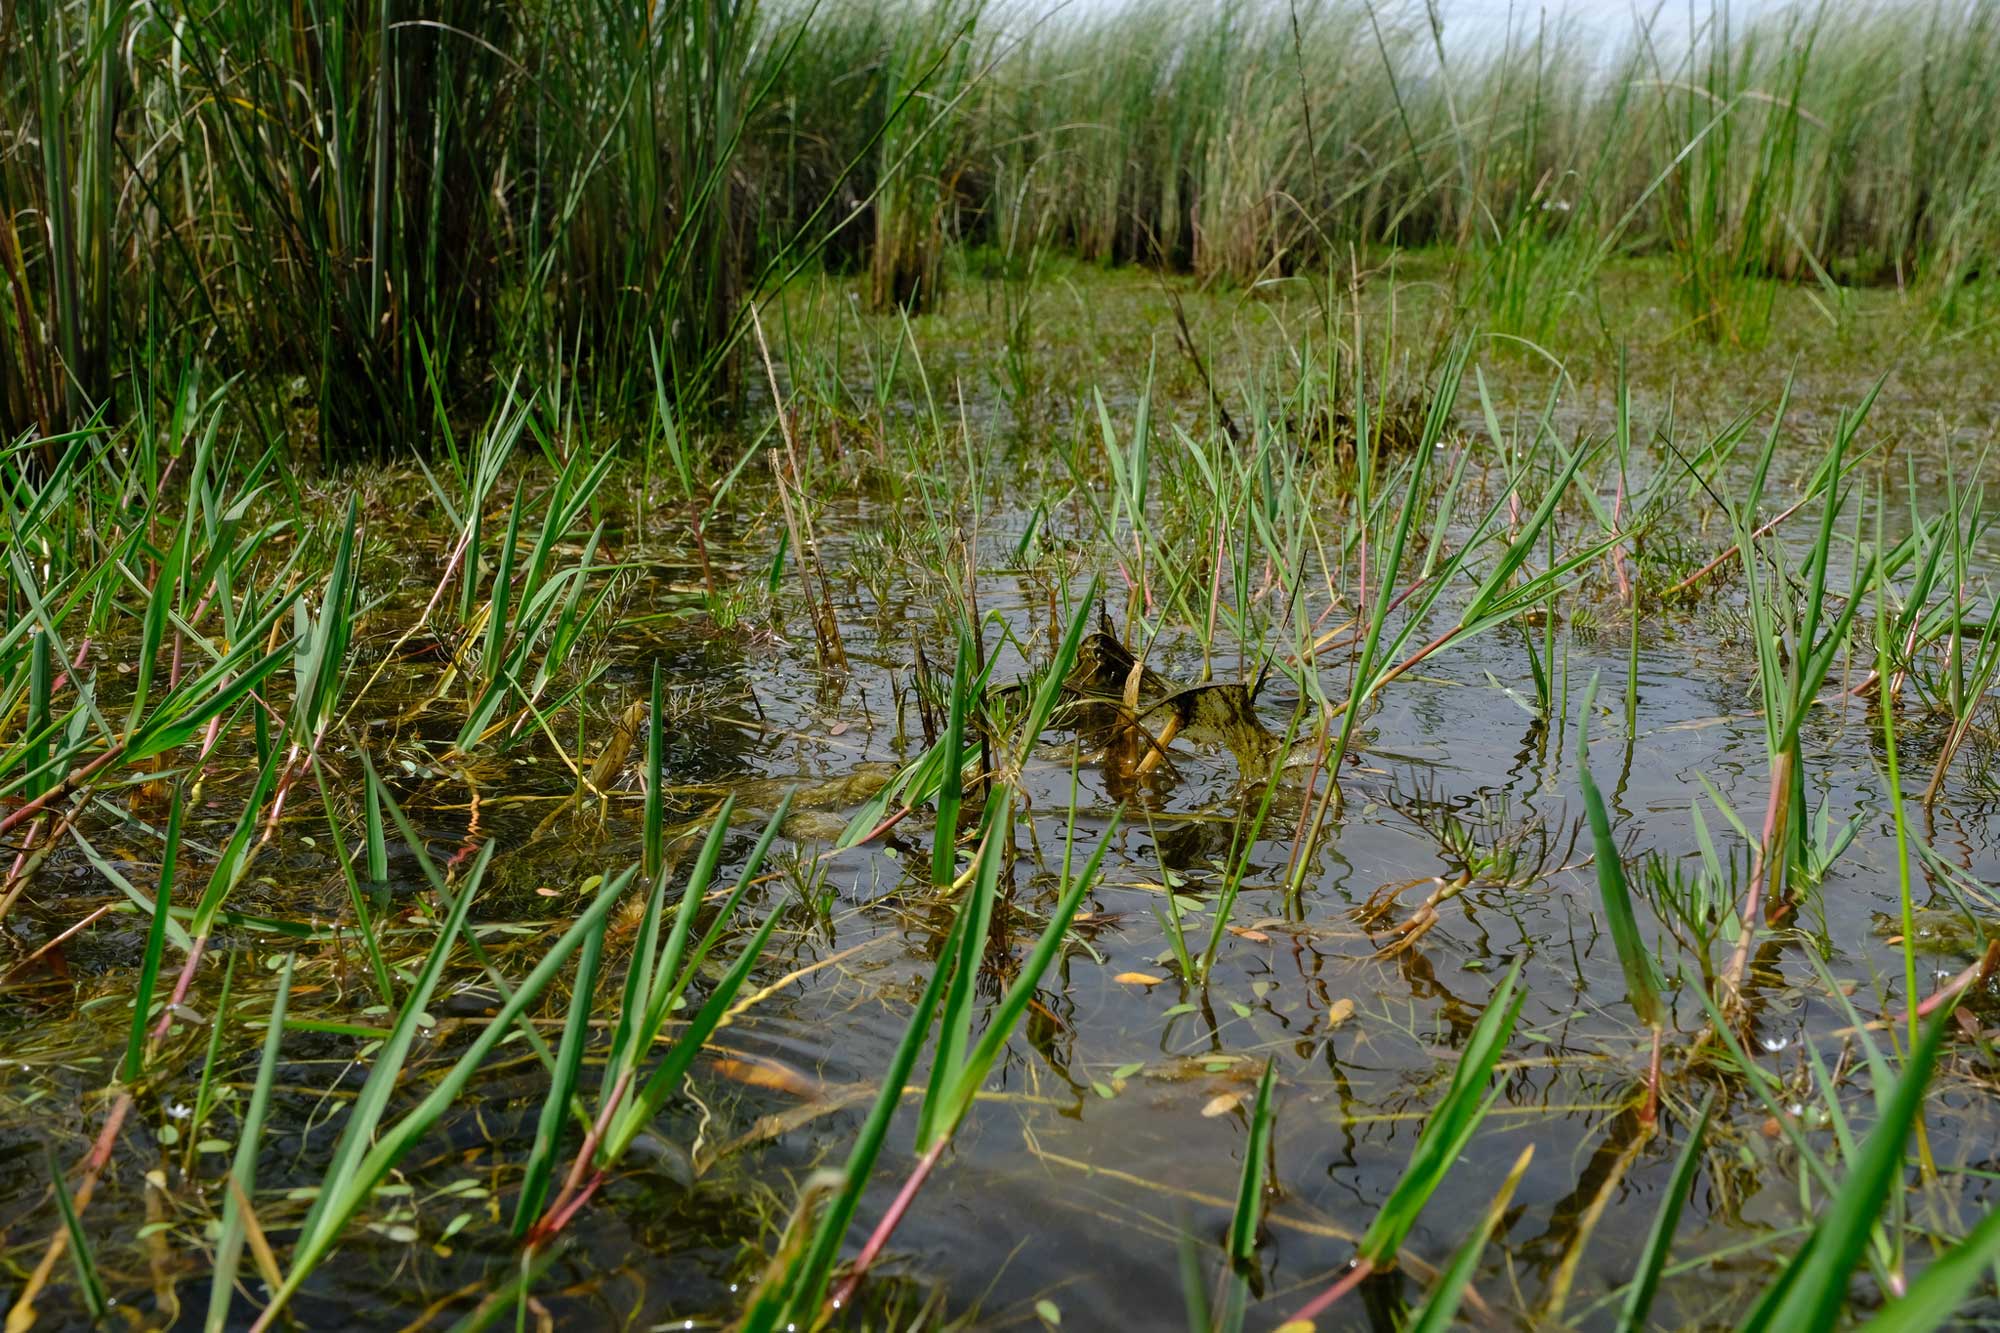 Photograph showing a close-up of young limpograss plants growing in water. The photo was taken just above the water surface and shows young plants with reddish stems and green leaves protruding from the water. More mature grasses can be seen in the background.